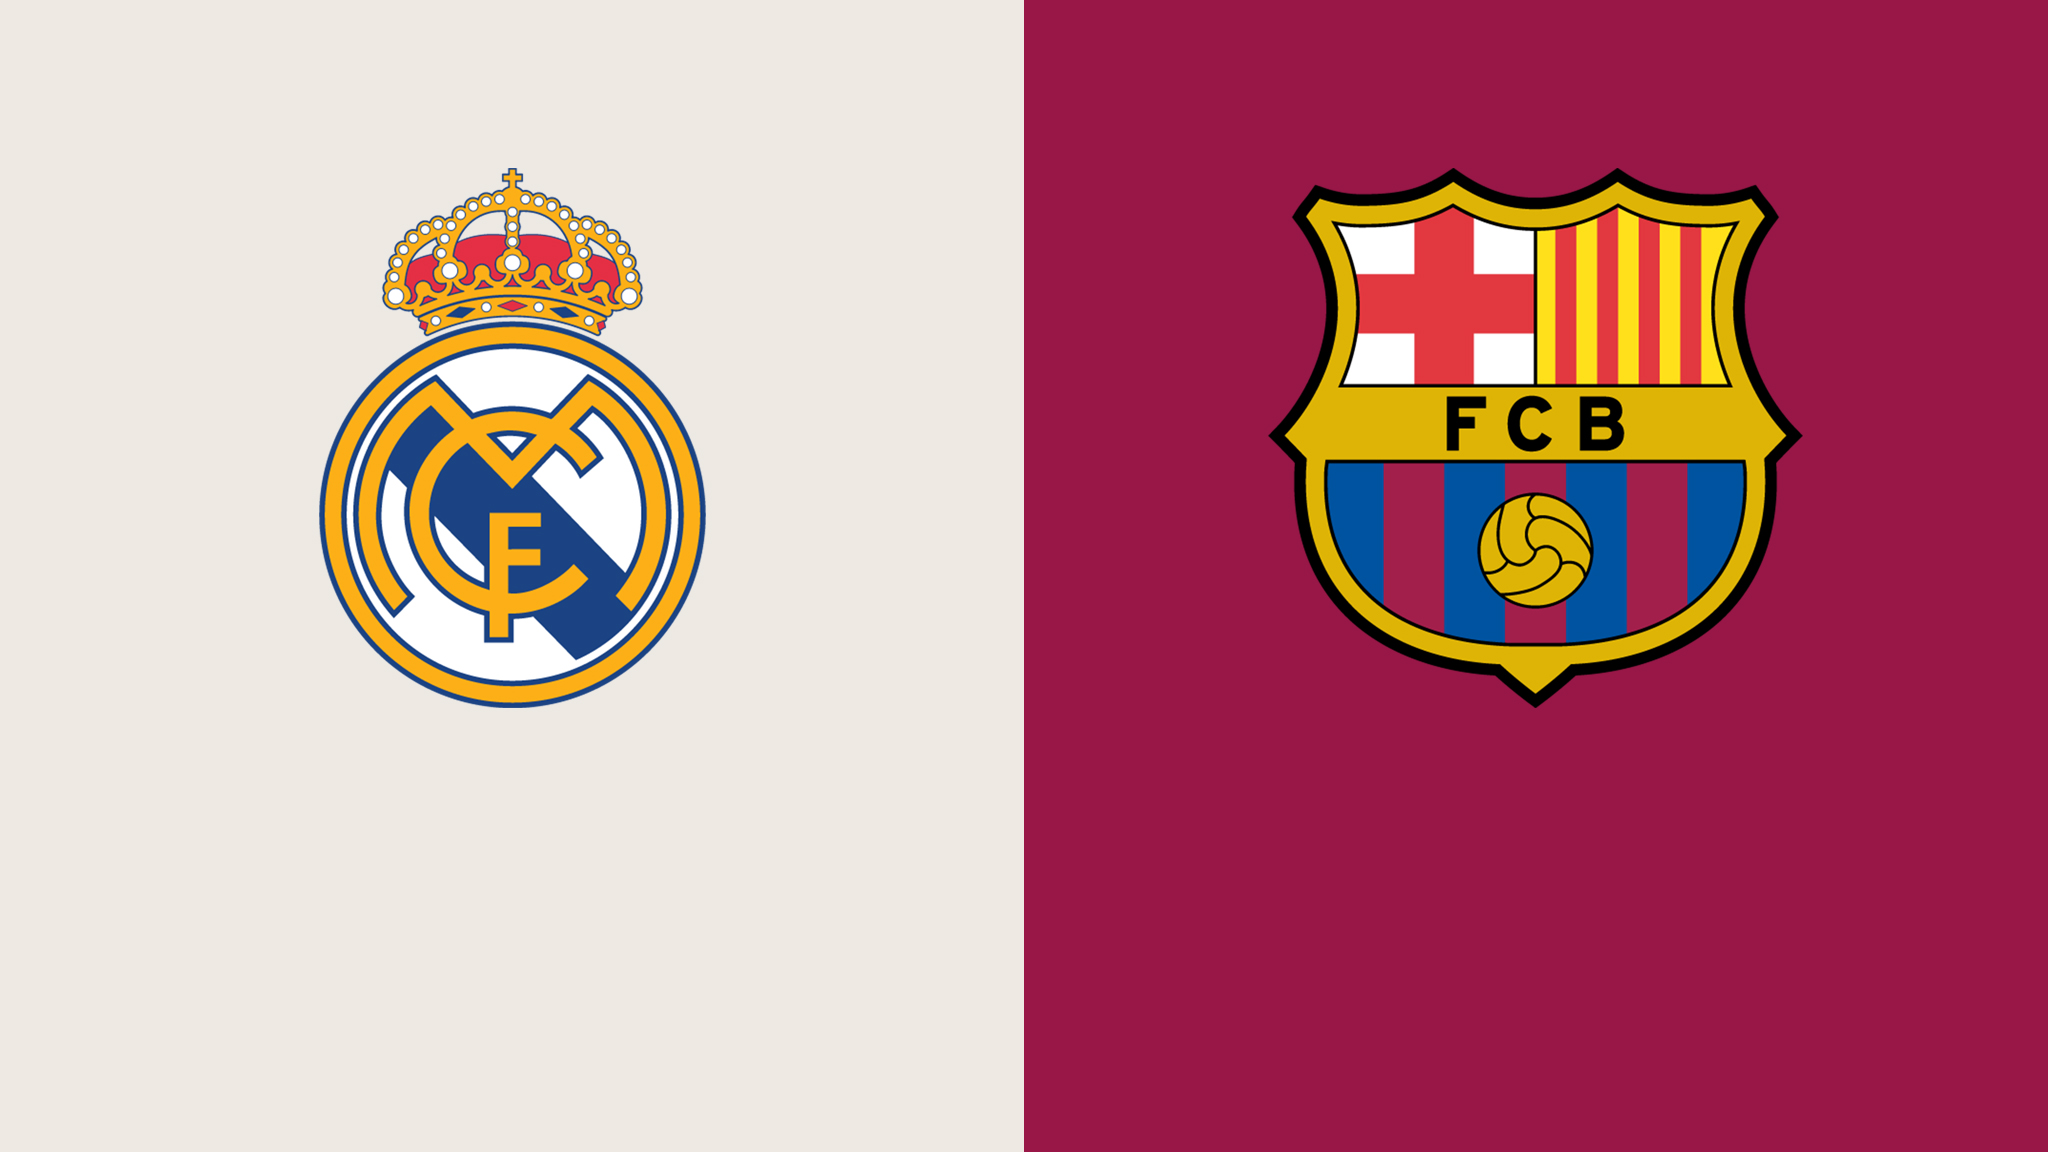  SPAIN: National cup Barcelona vs Real Madrid Live Score and Live Stream